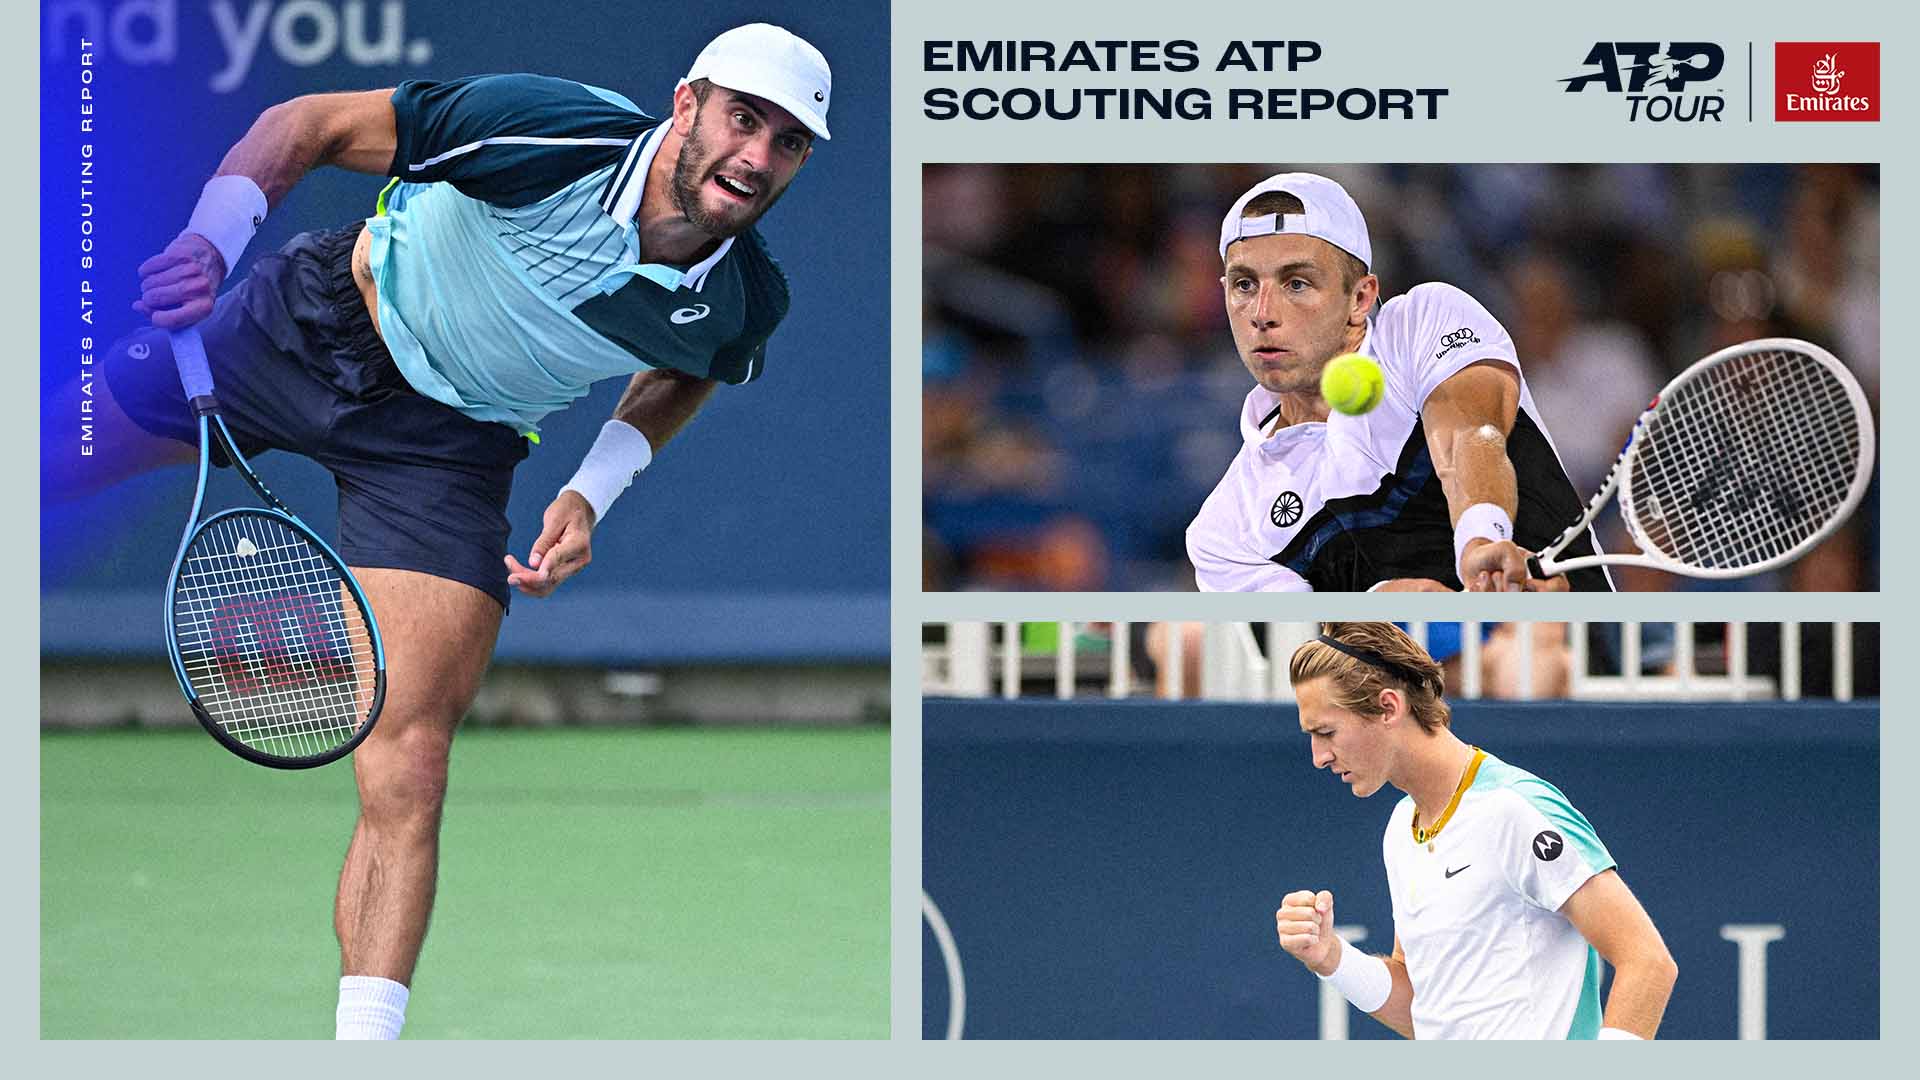 Borna Coric, Tallon Griekspoor and Sebastian Korda will compete at the ATP 250 Hard-court event this week in Winston-Salem.